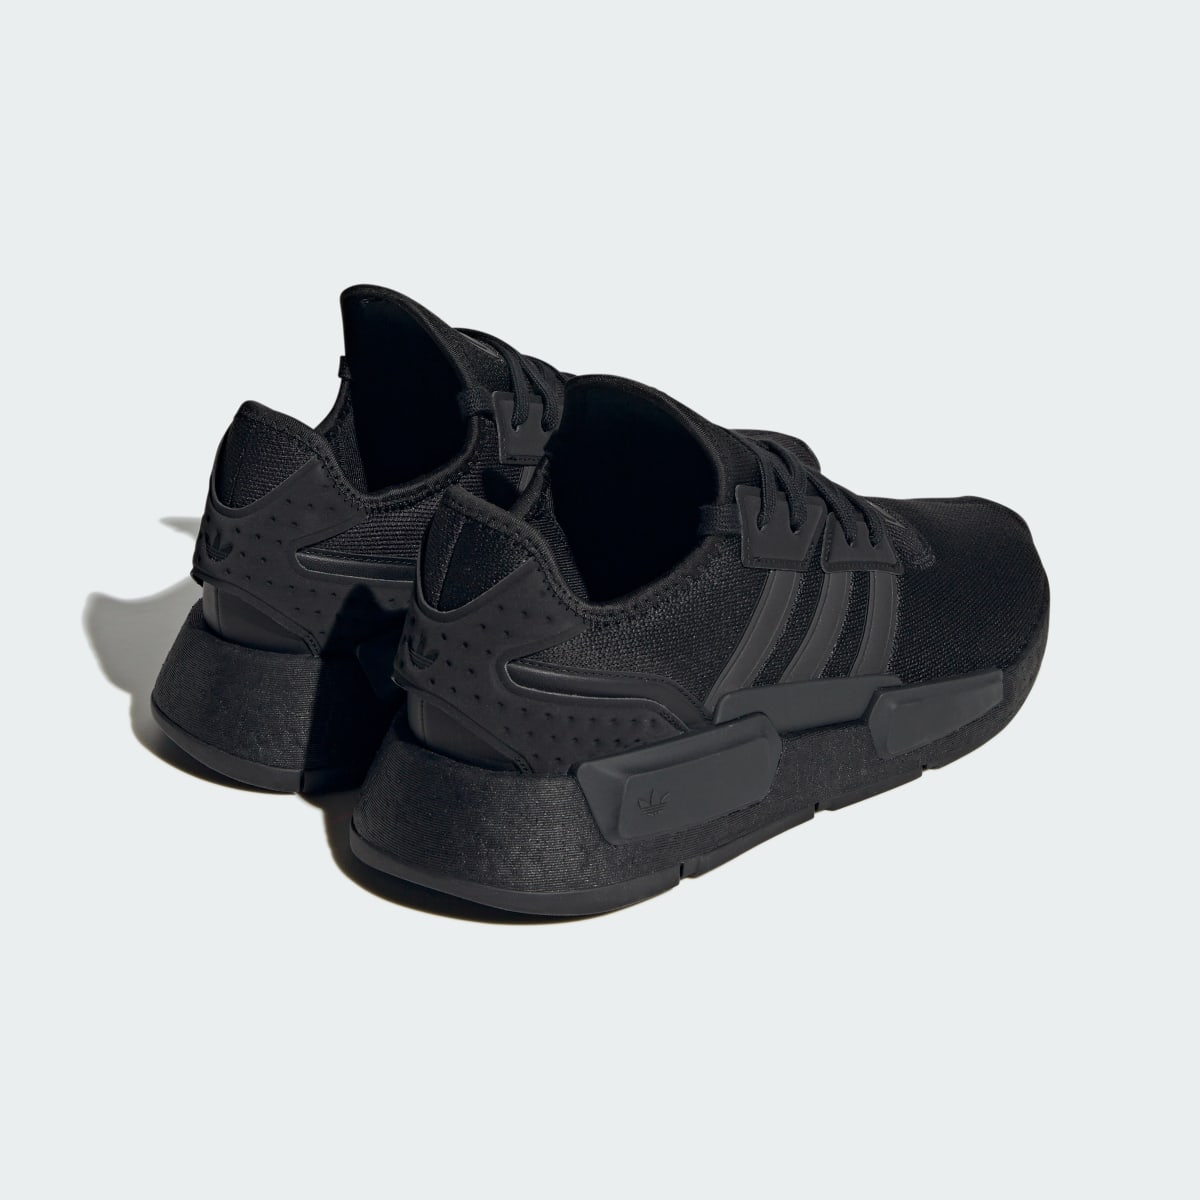 Adidas NMD_G1 Shoes. 12